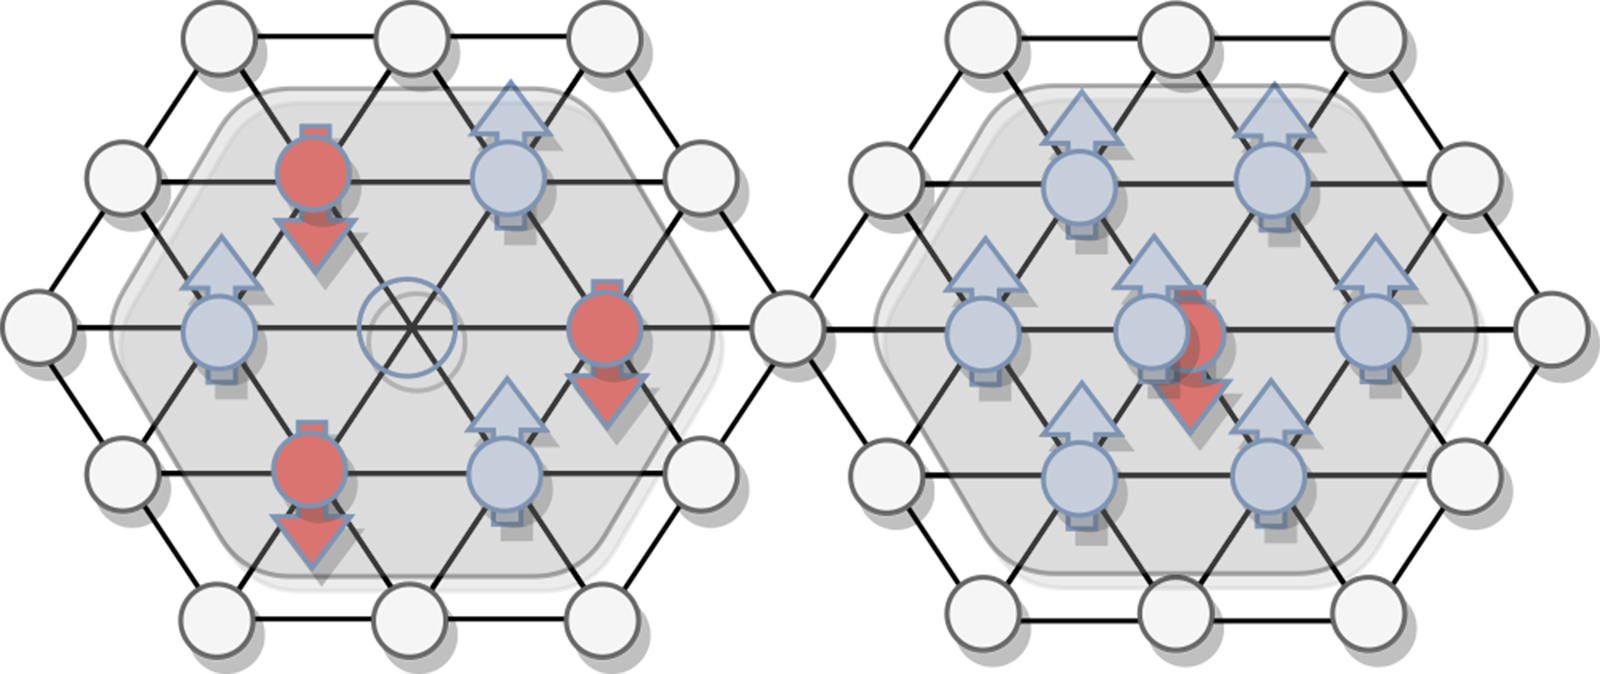 Enlarged view: Two different electron grids next to each other